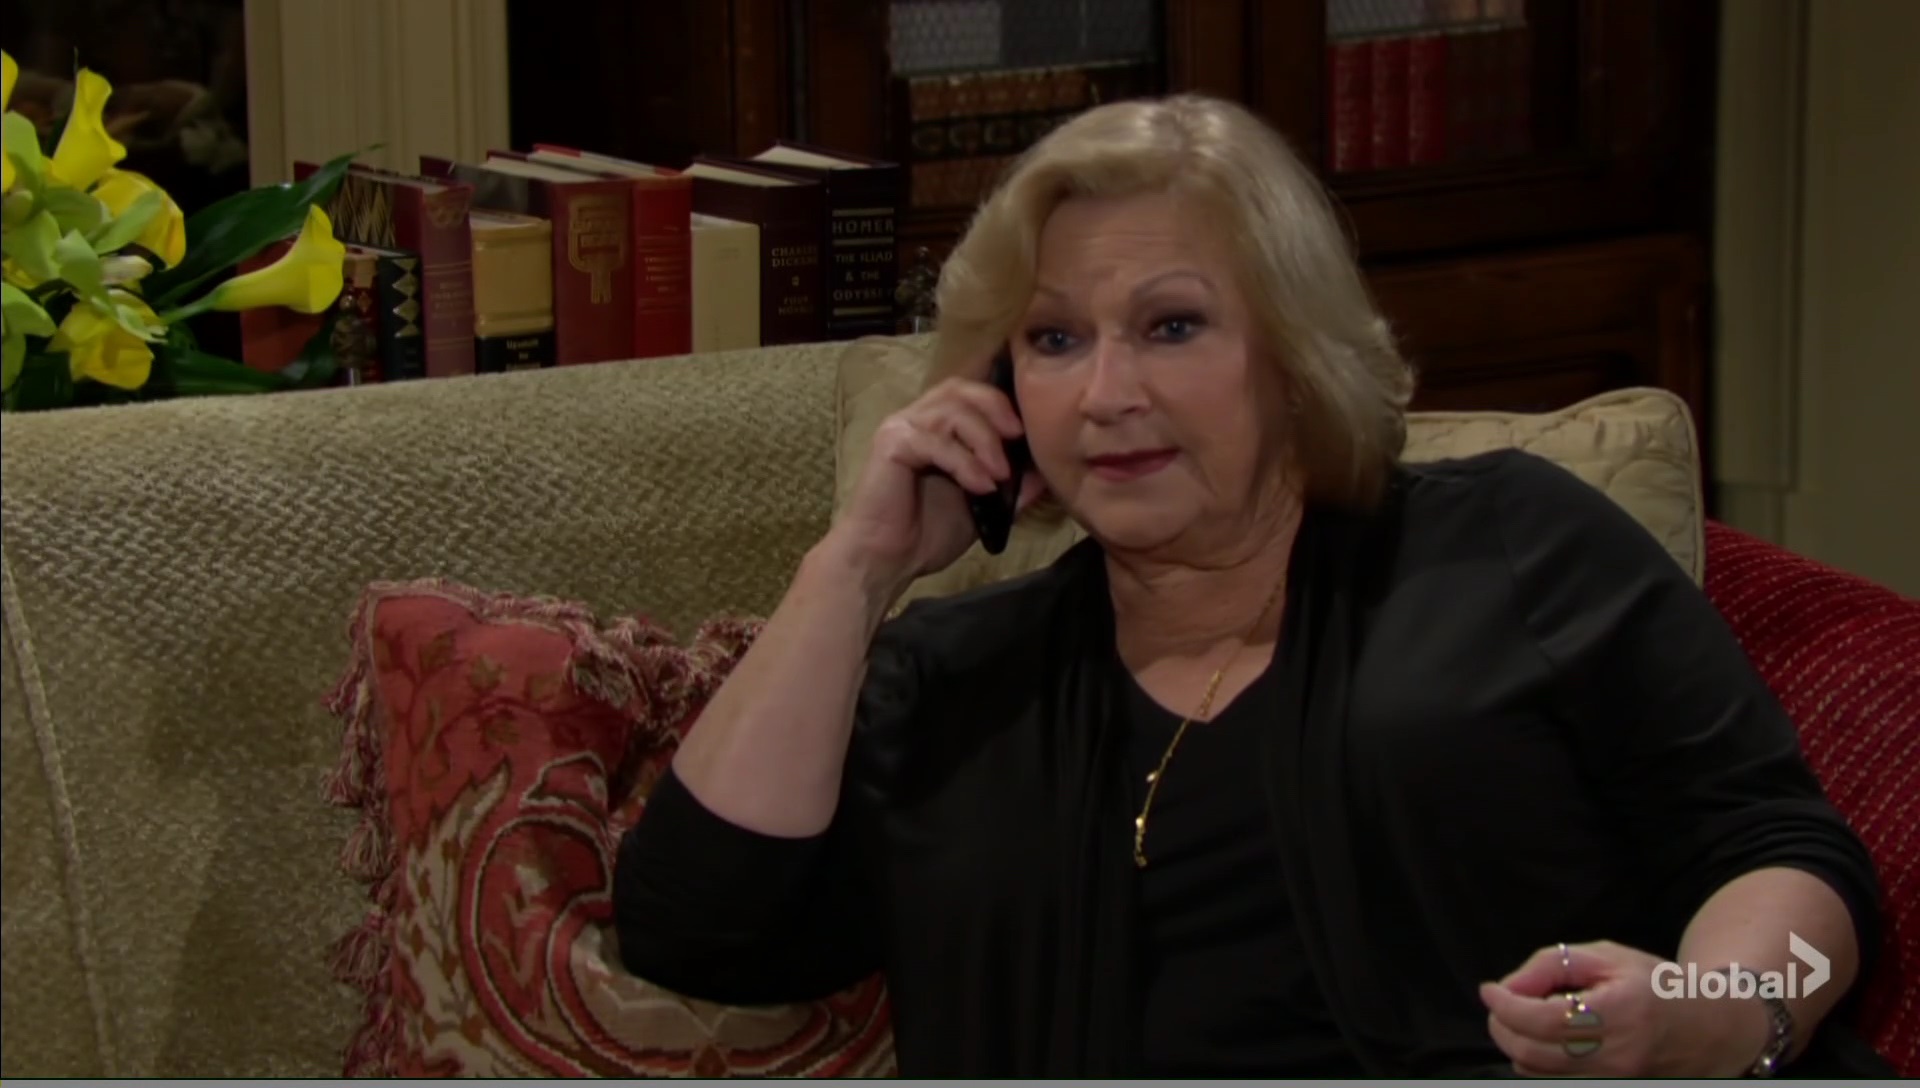 traci comforts jack young and restless cbs soapsspoilers